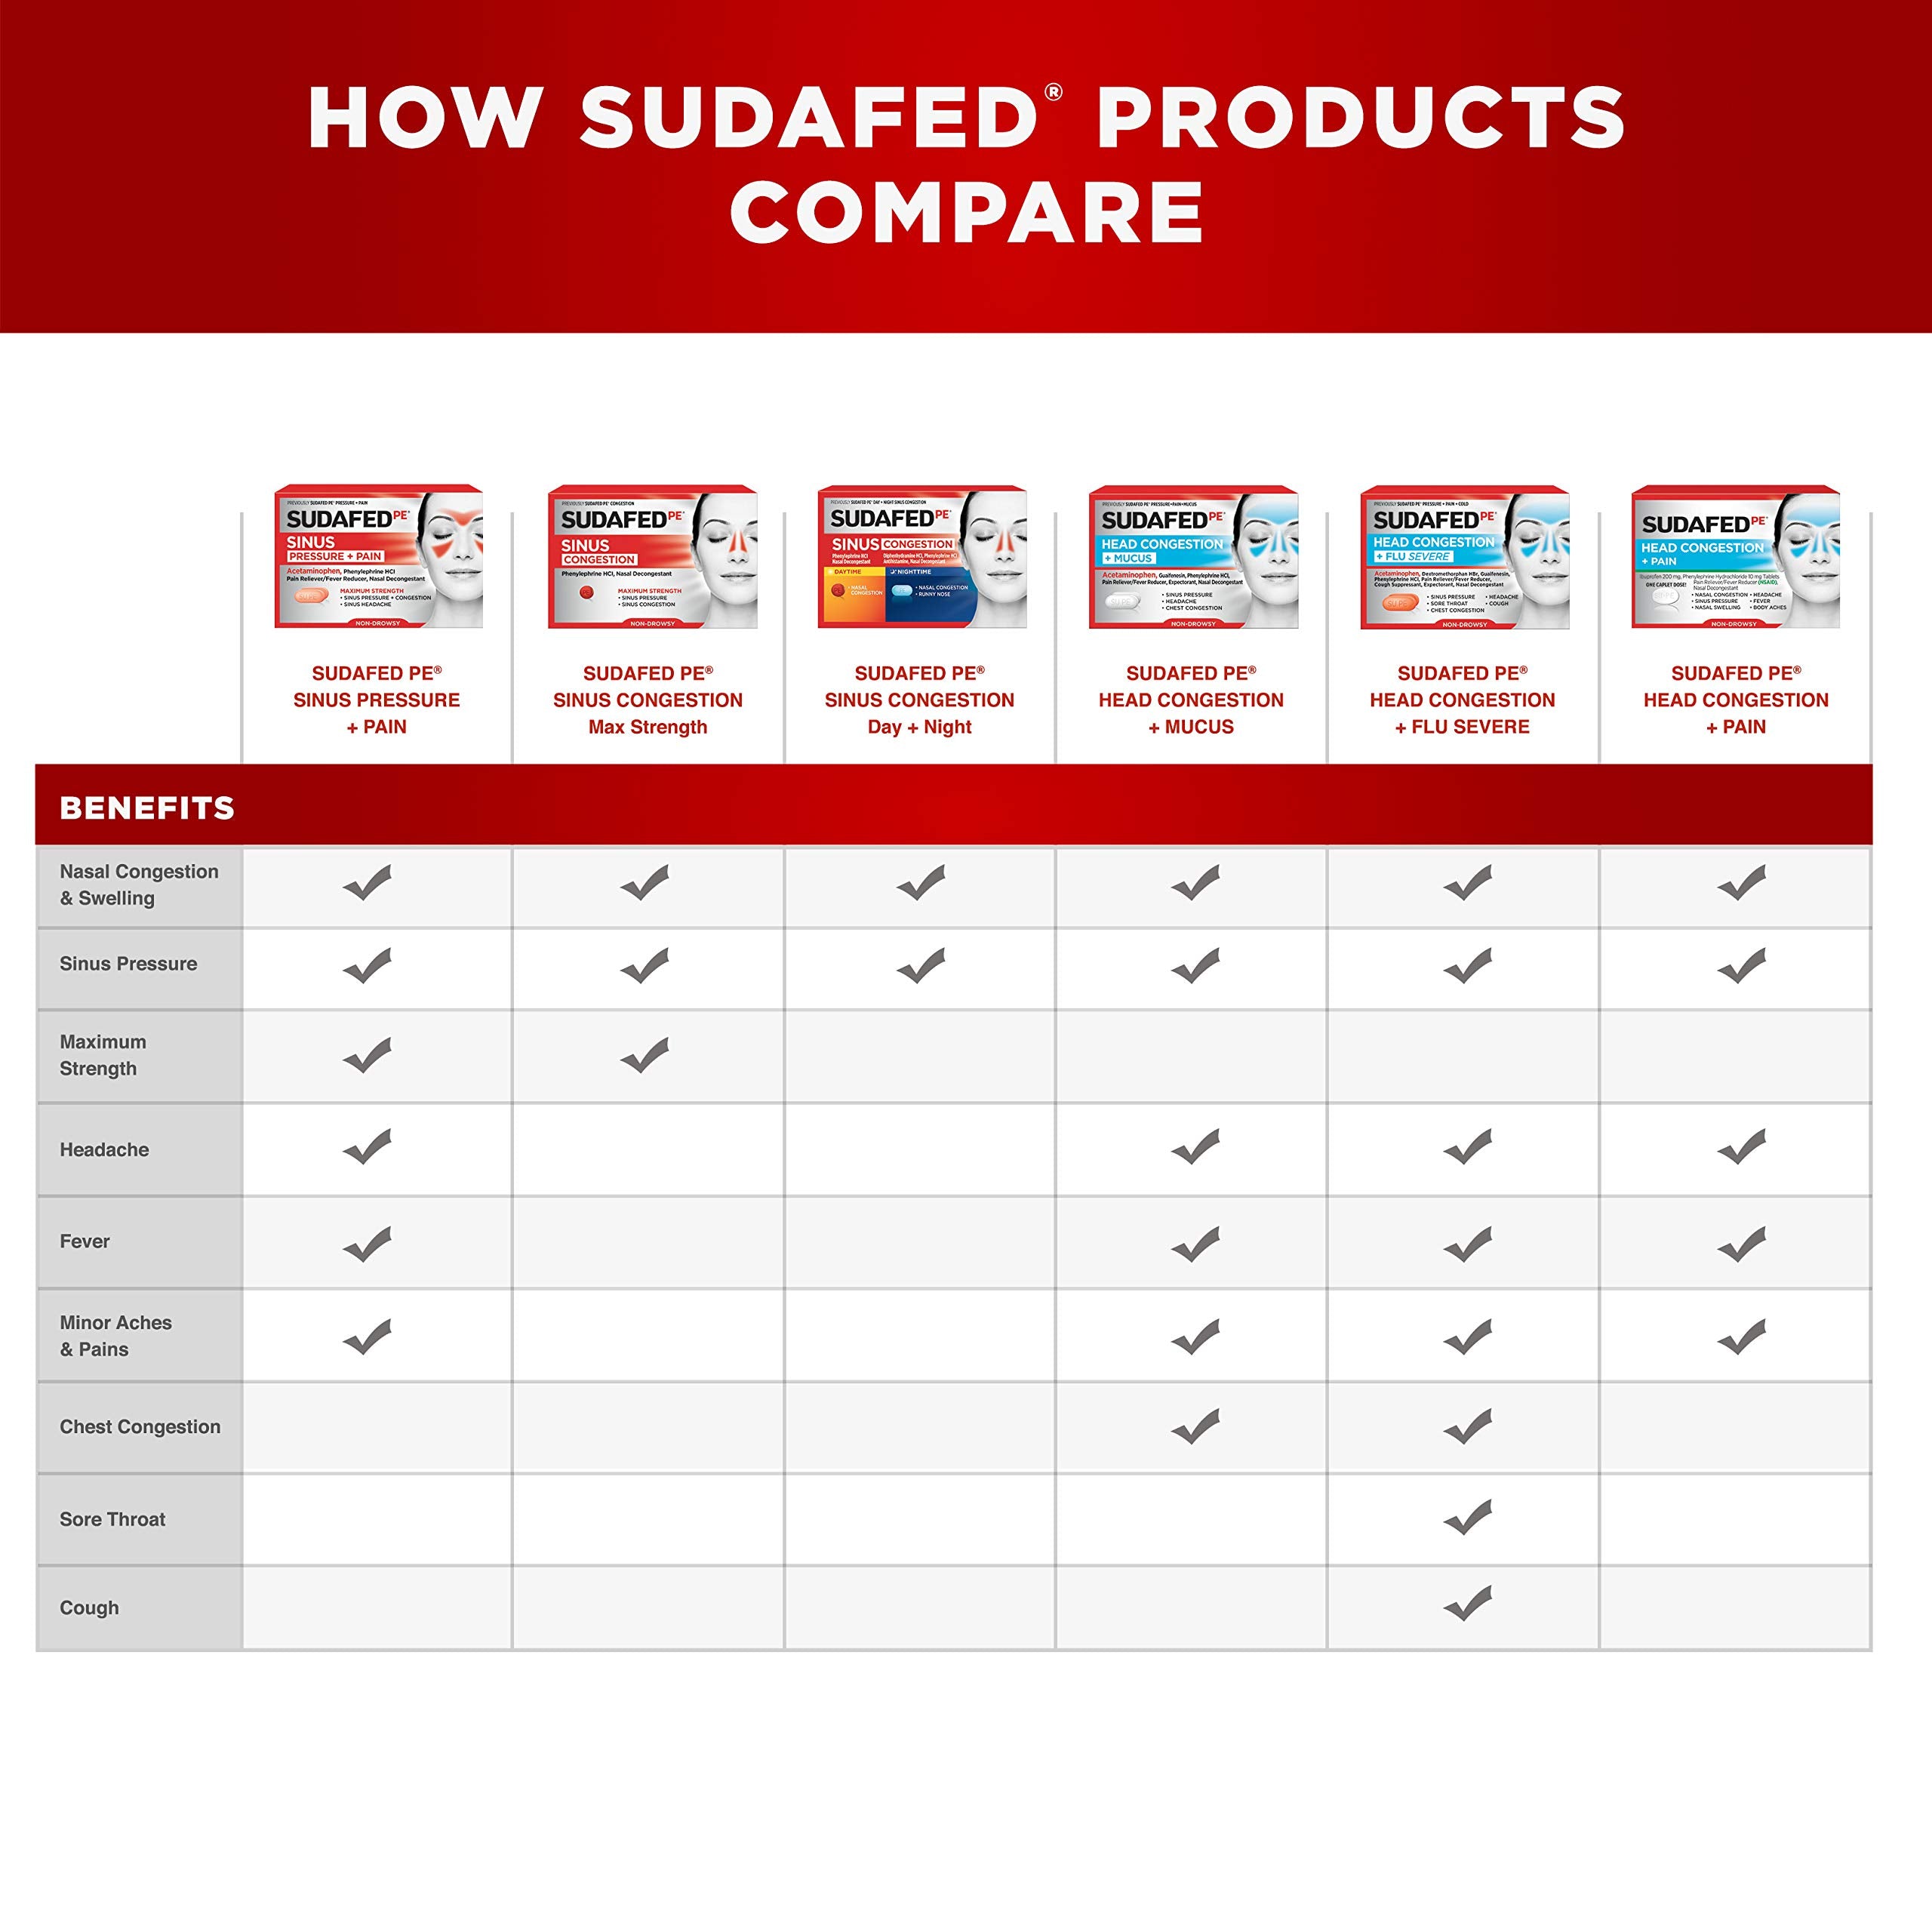 Sudafed PE Day and Night Sinus Pressure & Congestion Tablets, 20 Count